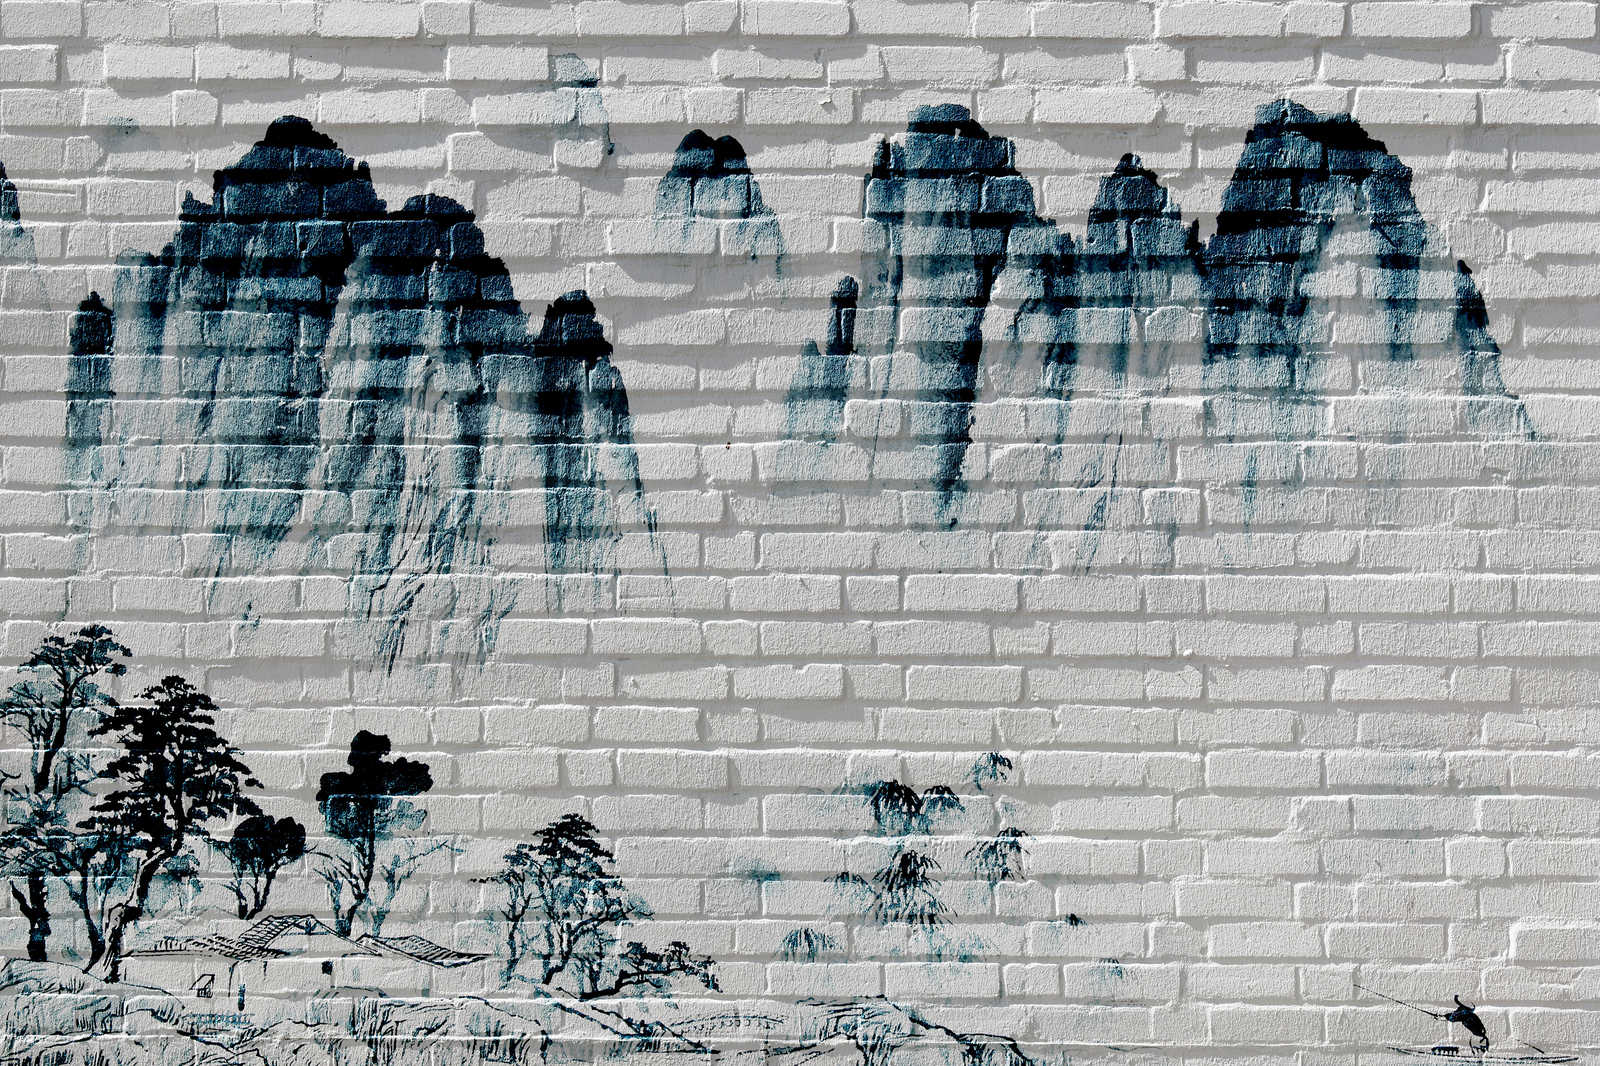             Canvas painting Mountains on Brick Wall - 0,90 m x 0,60 m
        